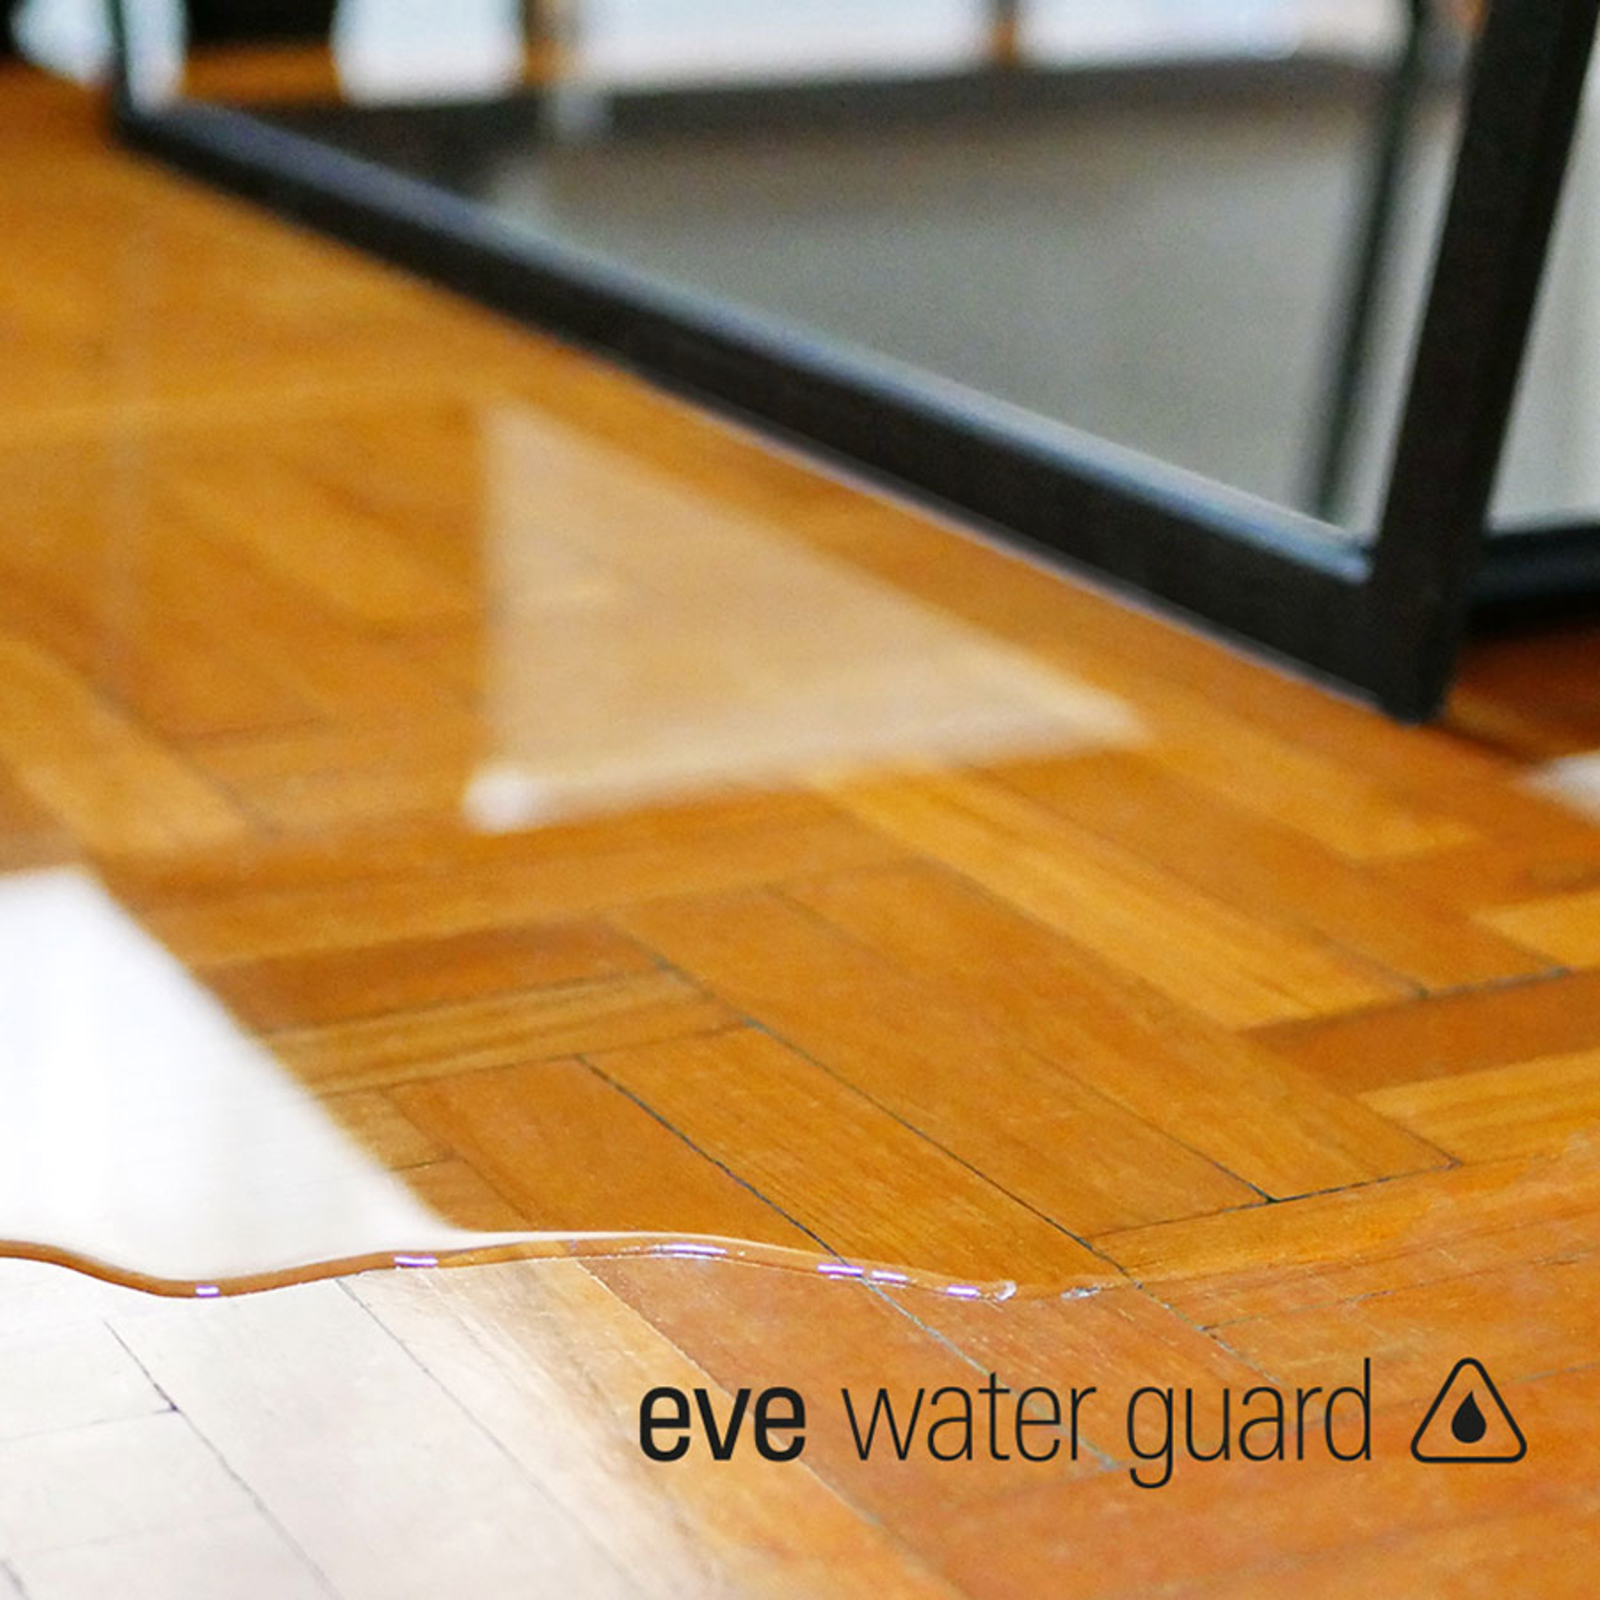 Eve Water Guard, smart water detector with Thread